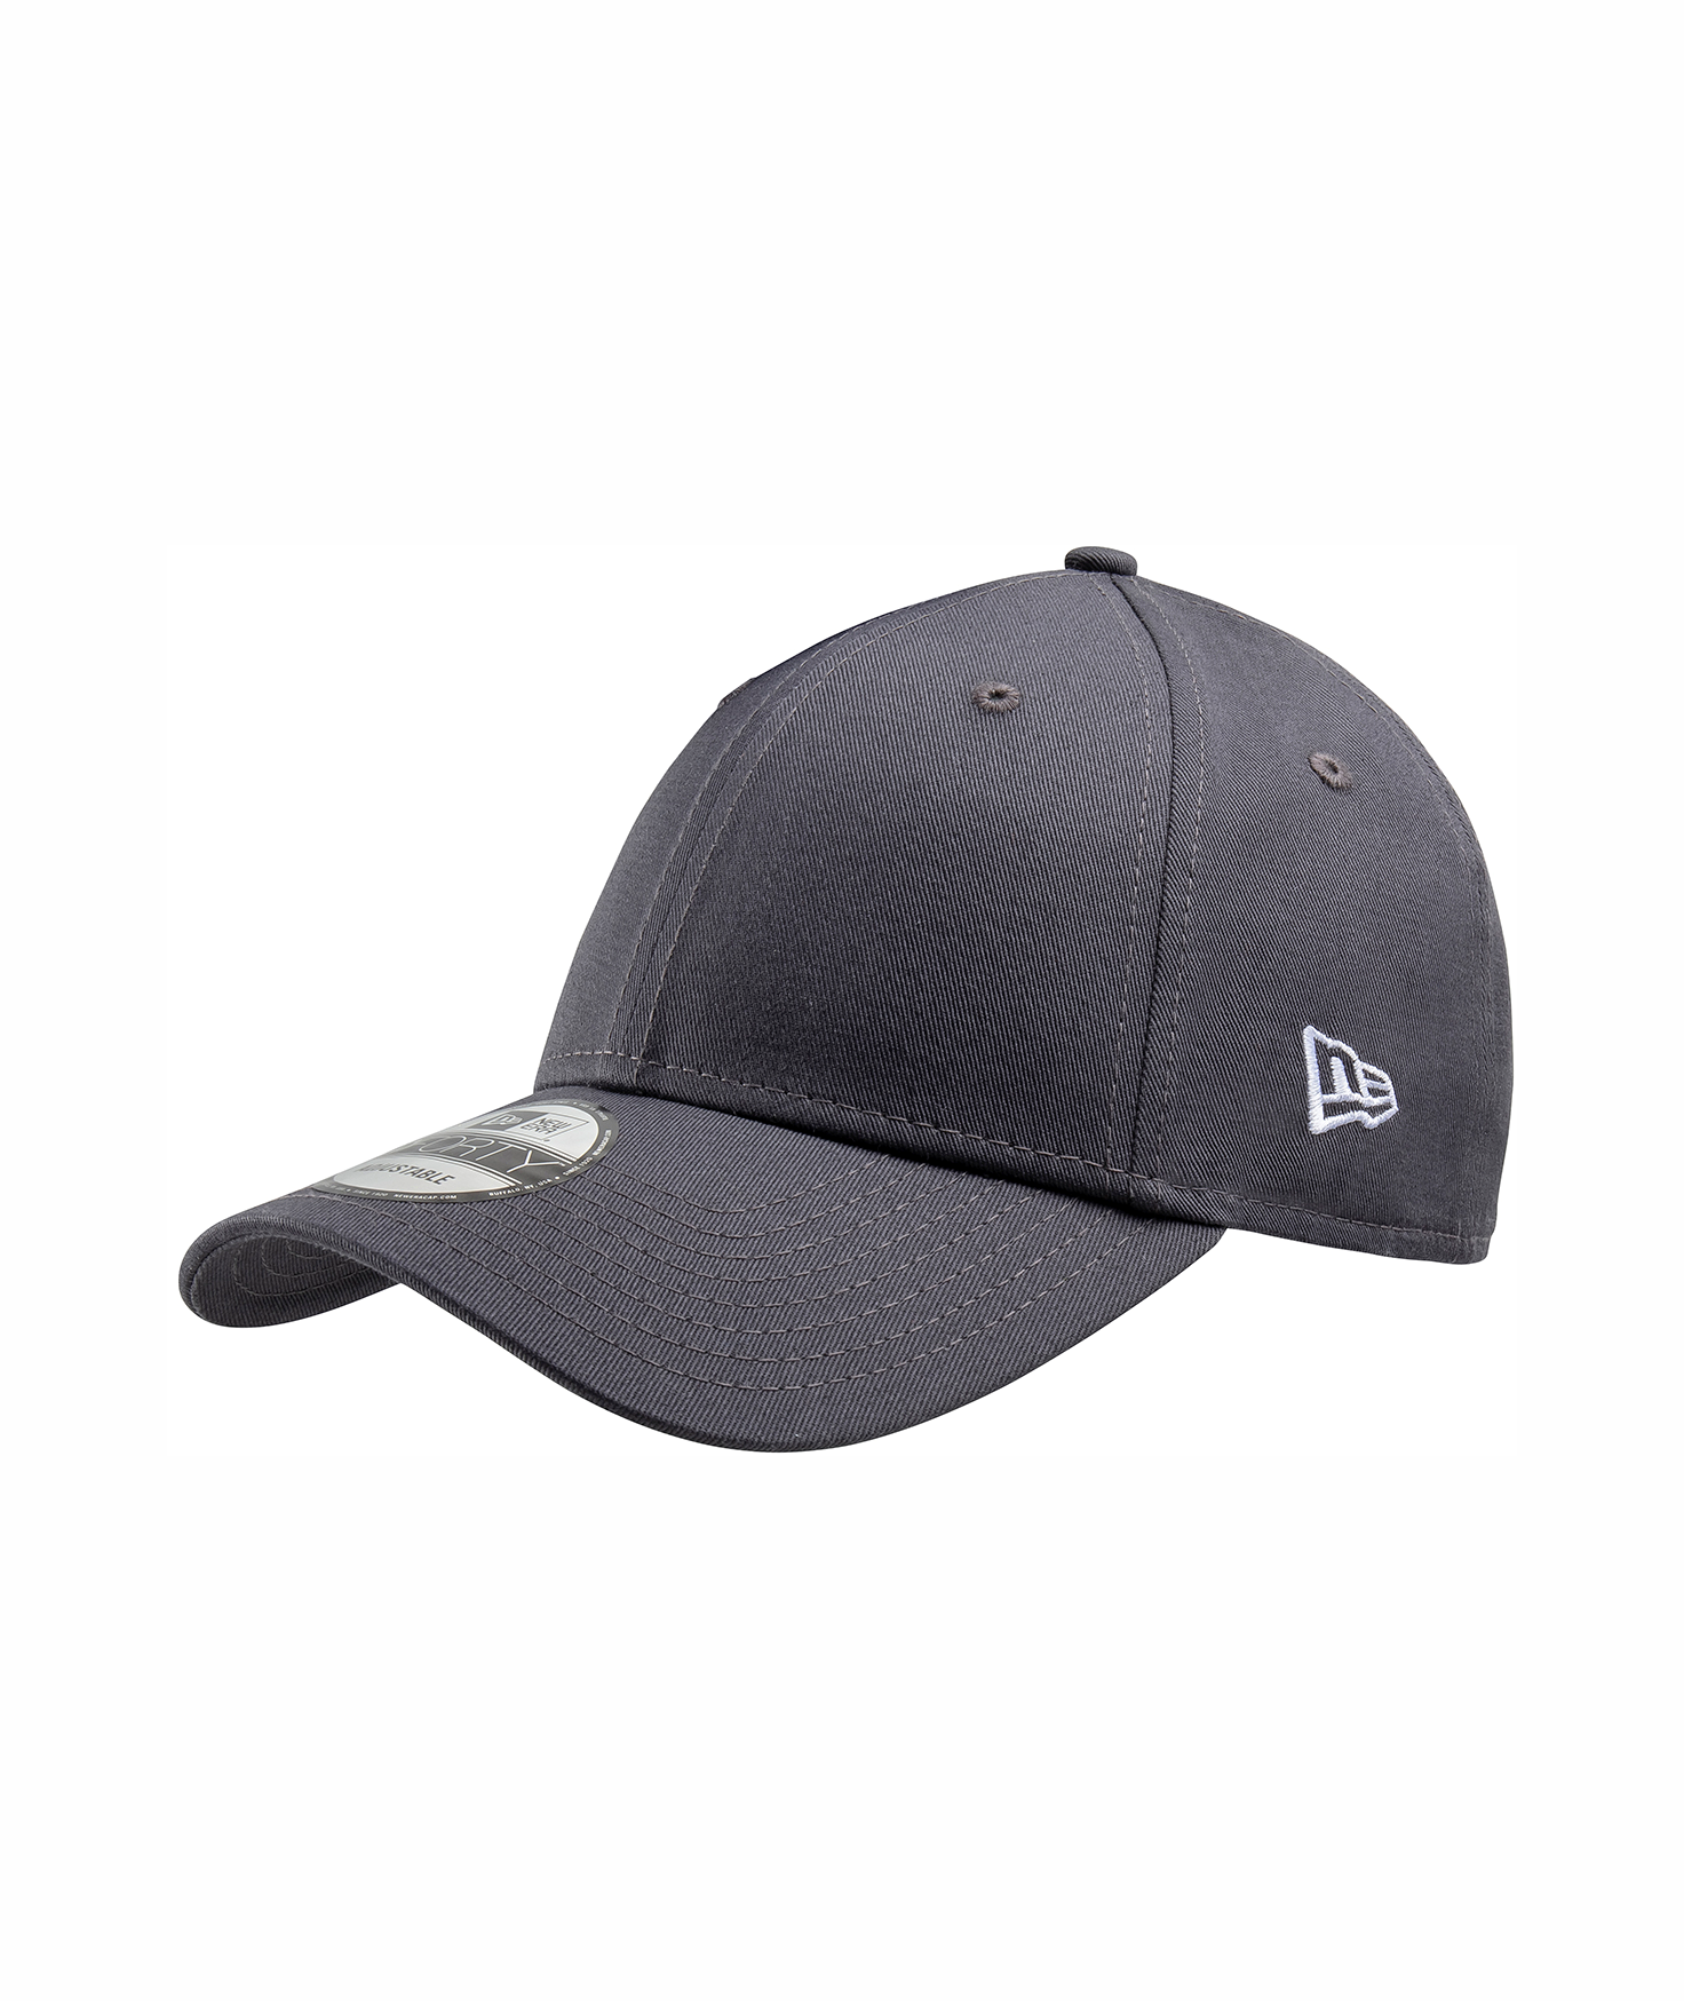 NEW Essential 9FORTY Cap — Stitch to